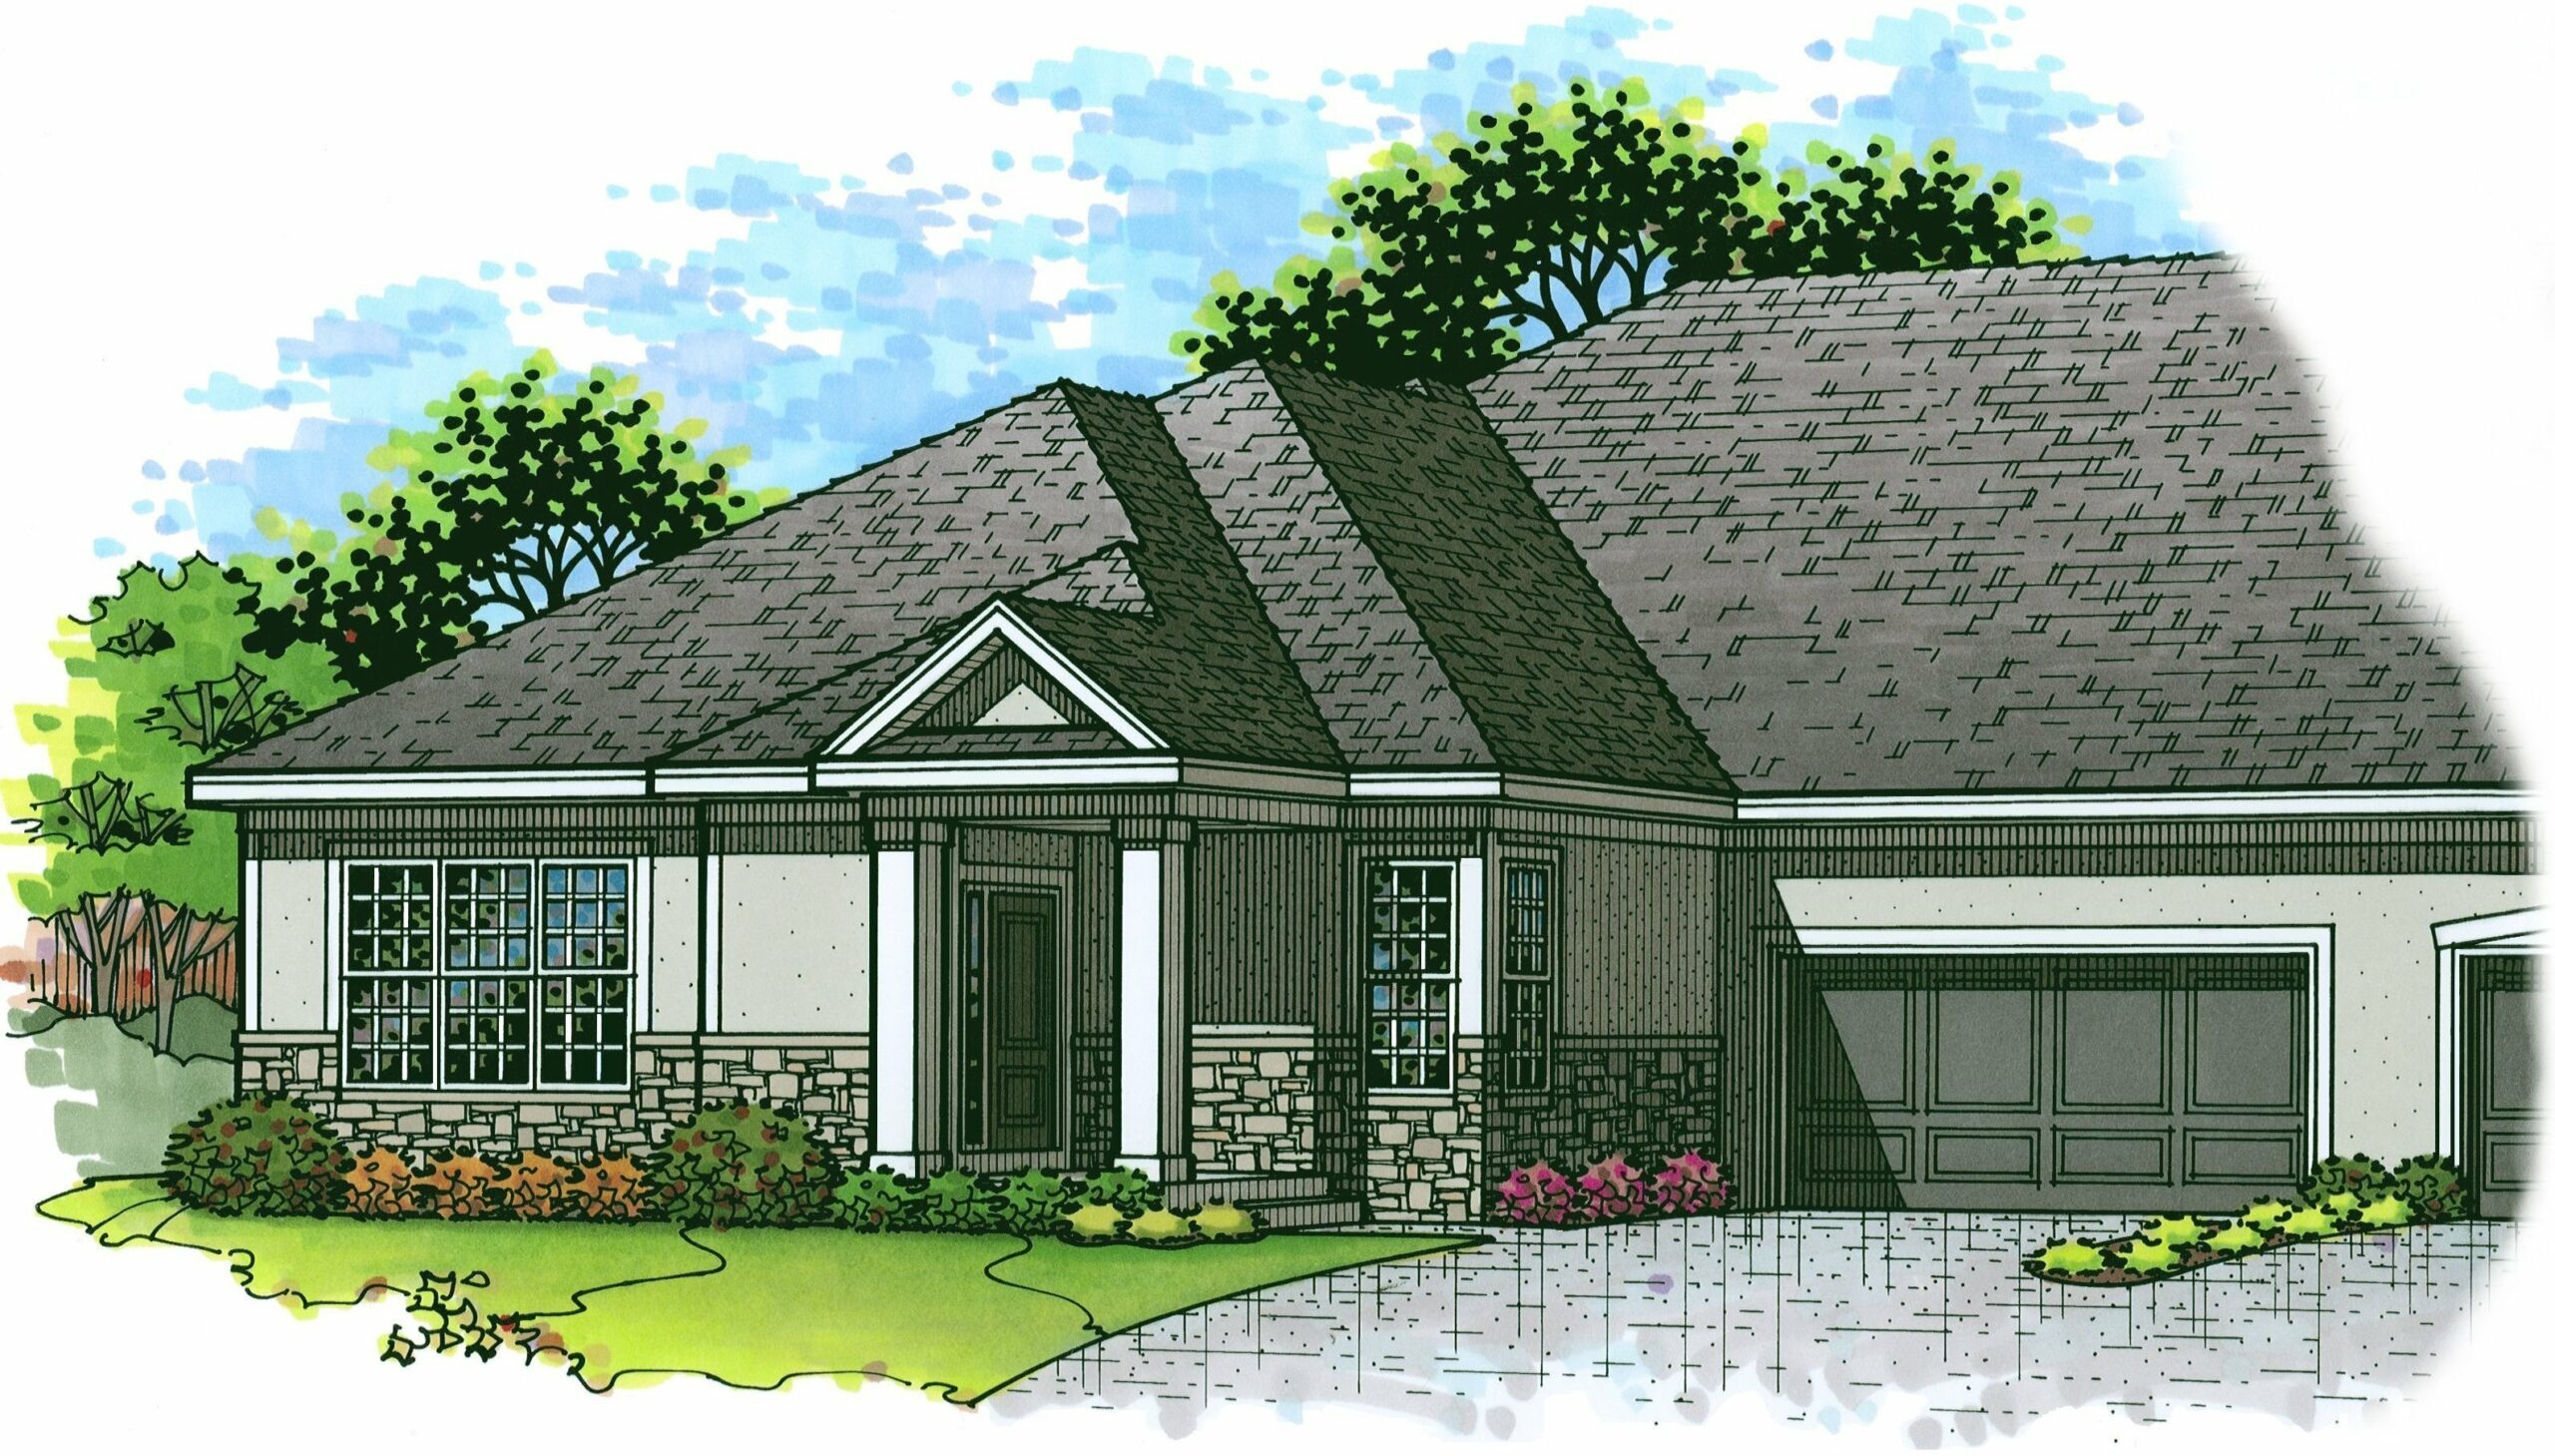 Rendering of the front elevation of 912 E 110th Ter, Kansas City, MO from Lambie Homes